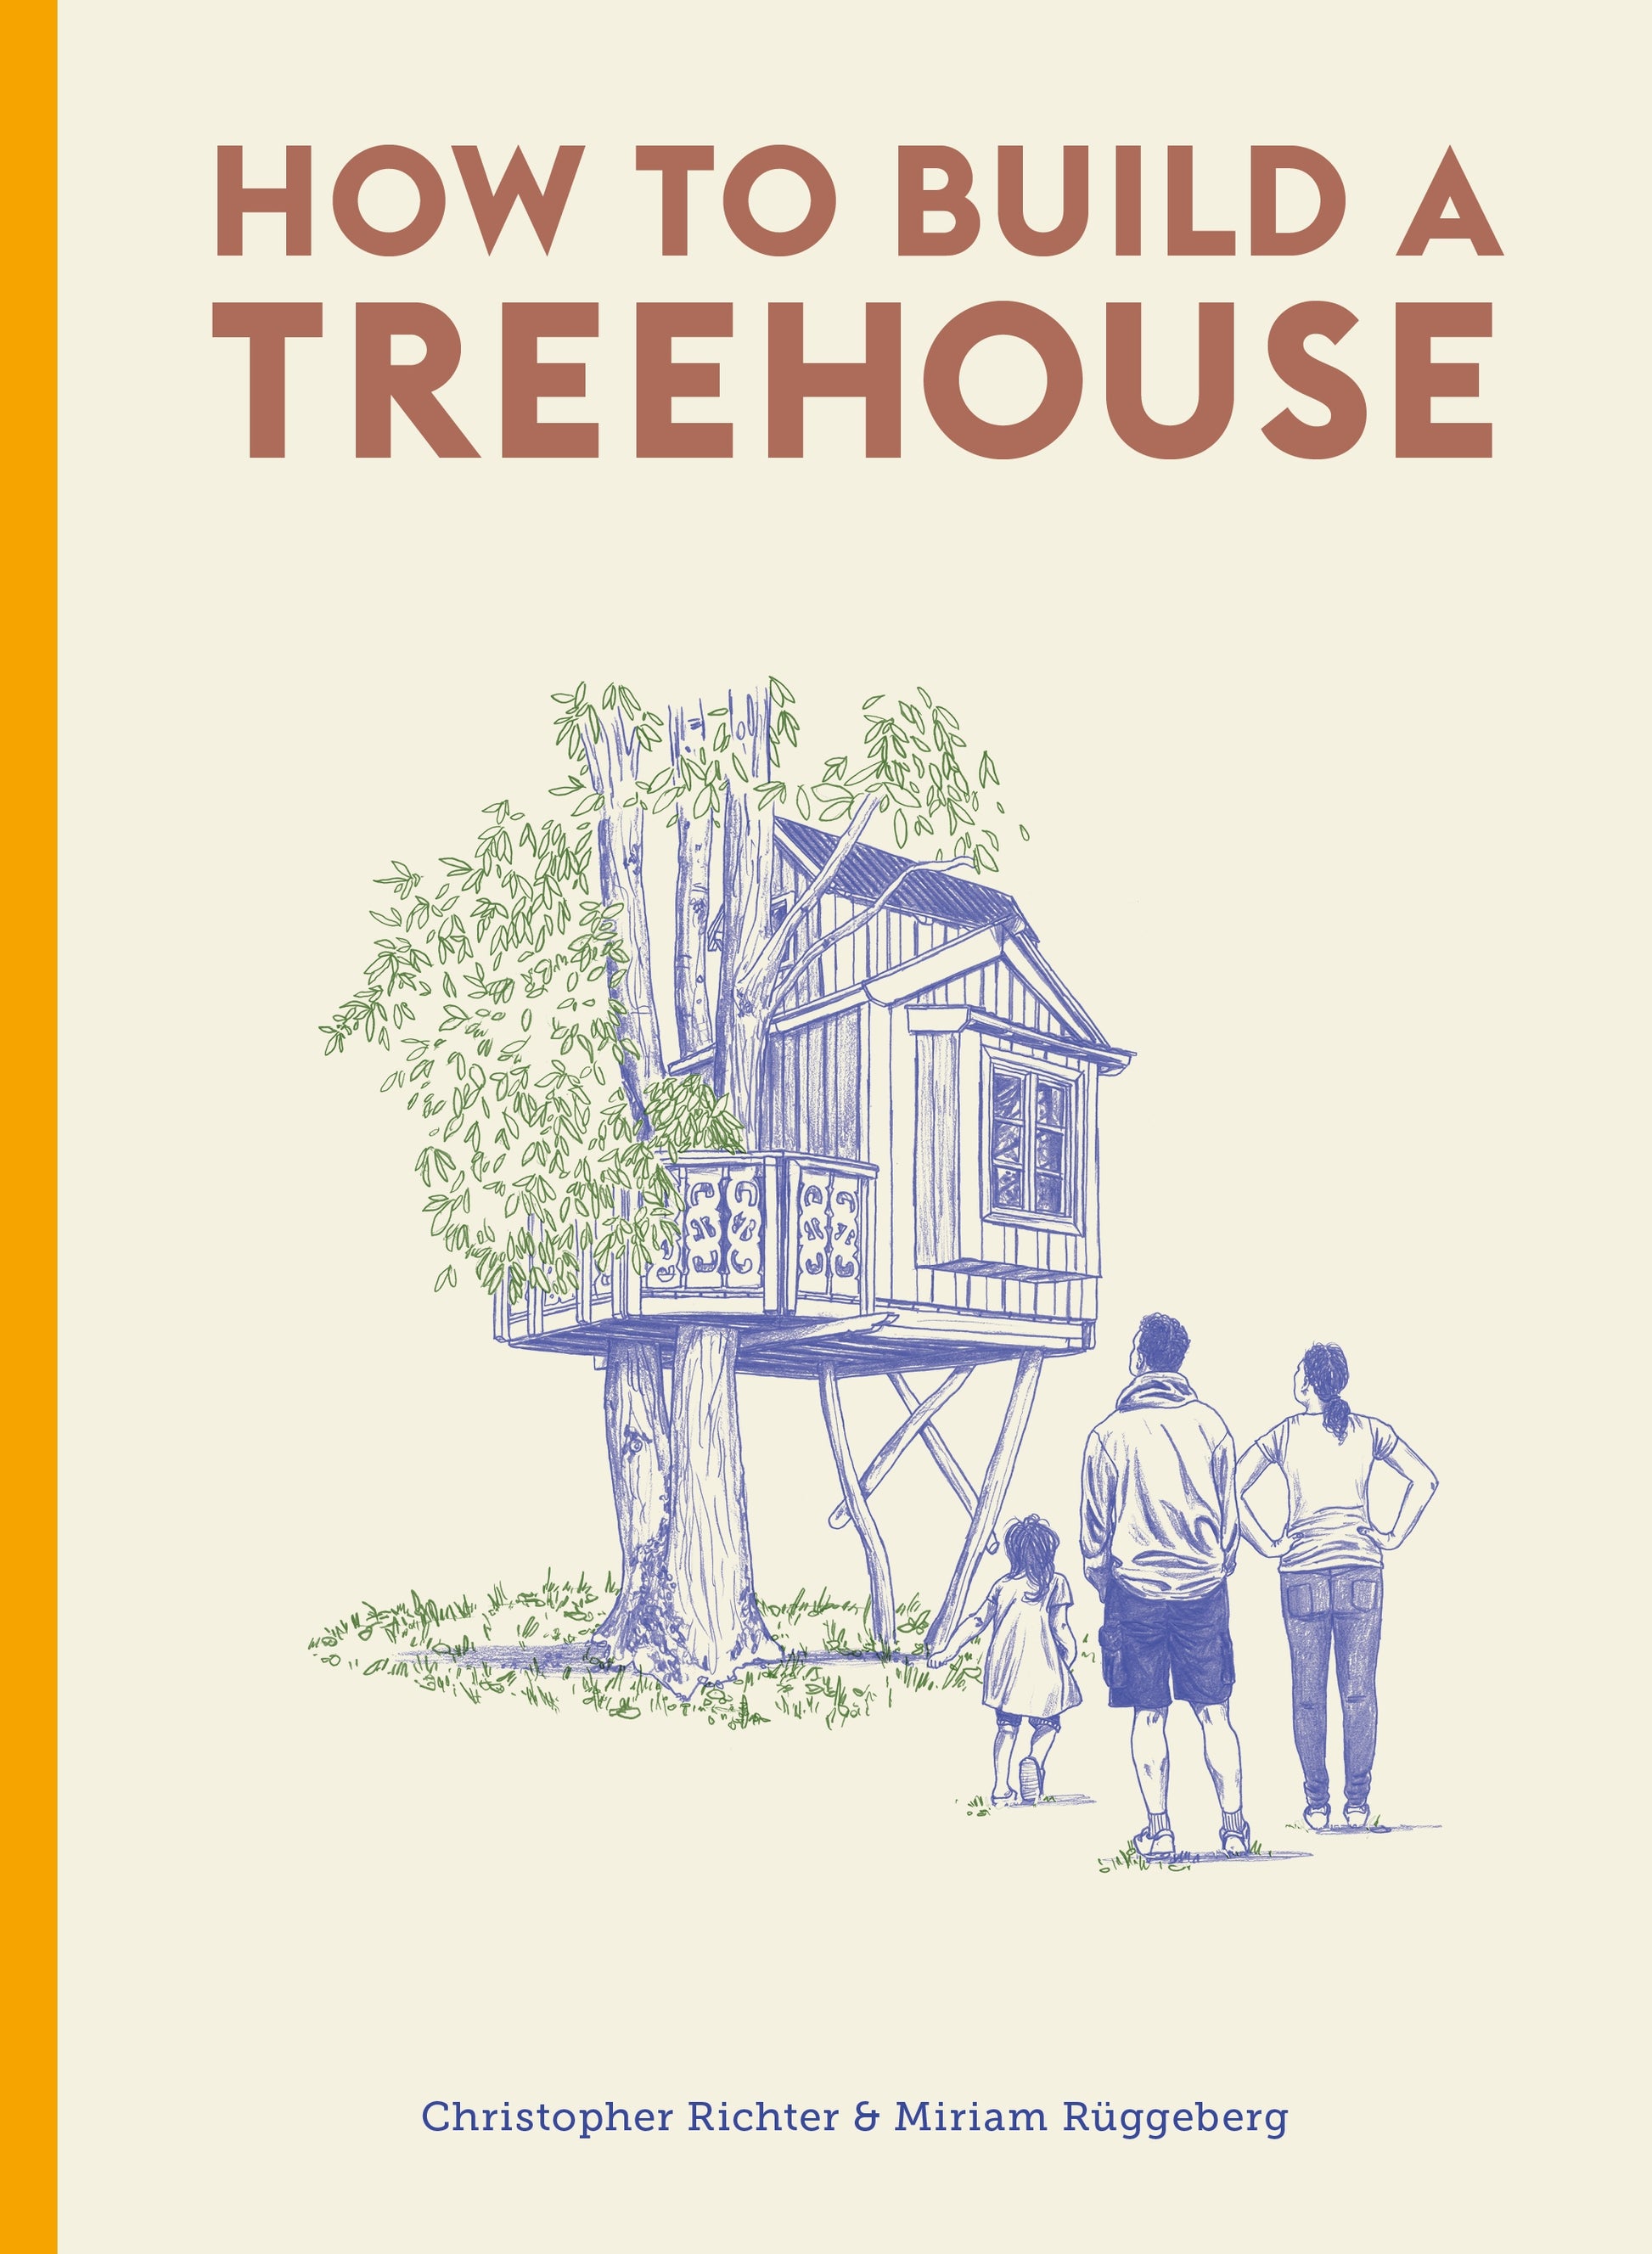 How to Build a Treehouse by Christopher Richter, David Sparshott, Miriam Ruggeberg